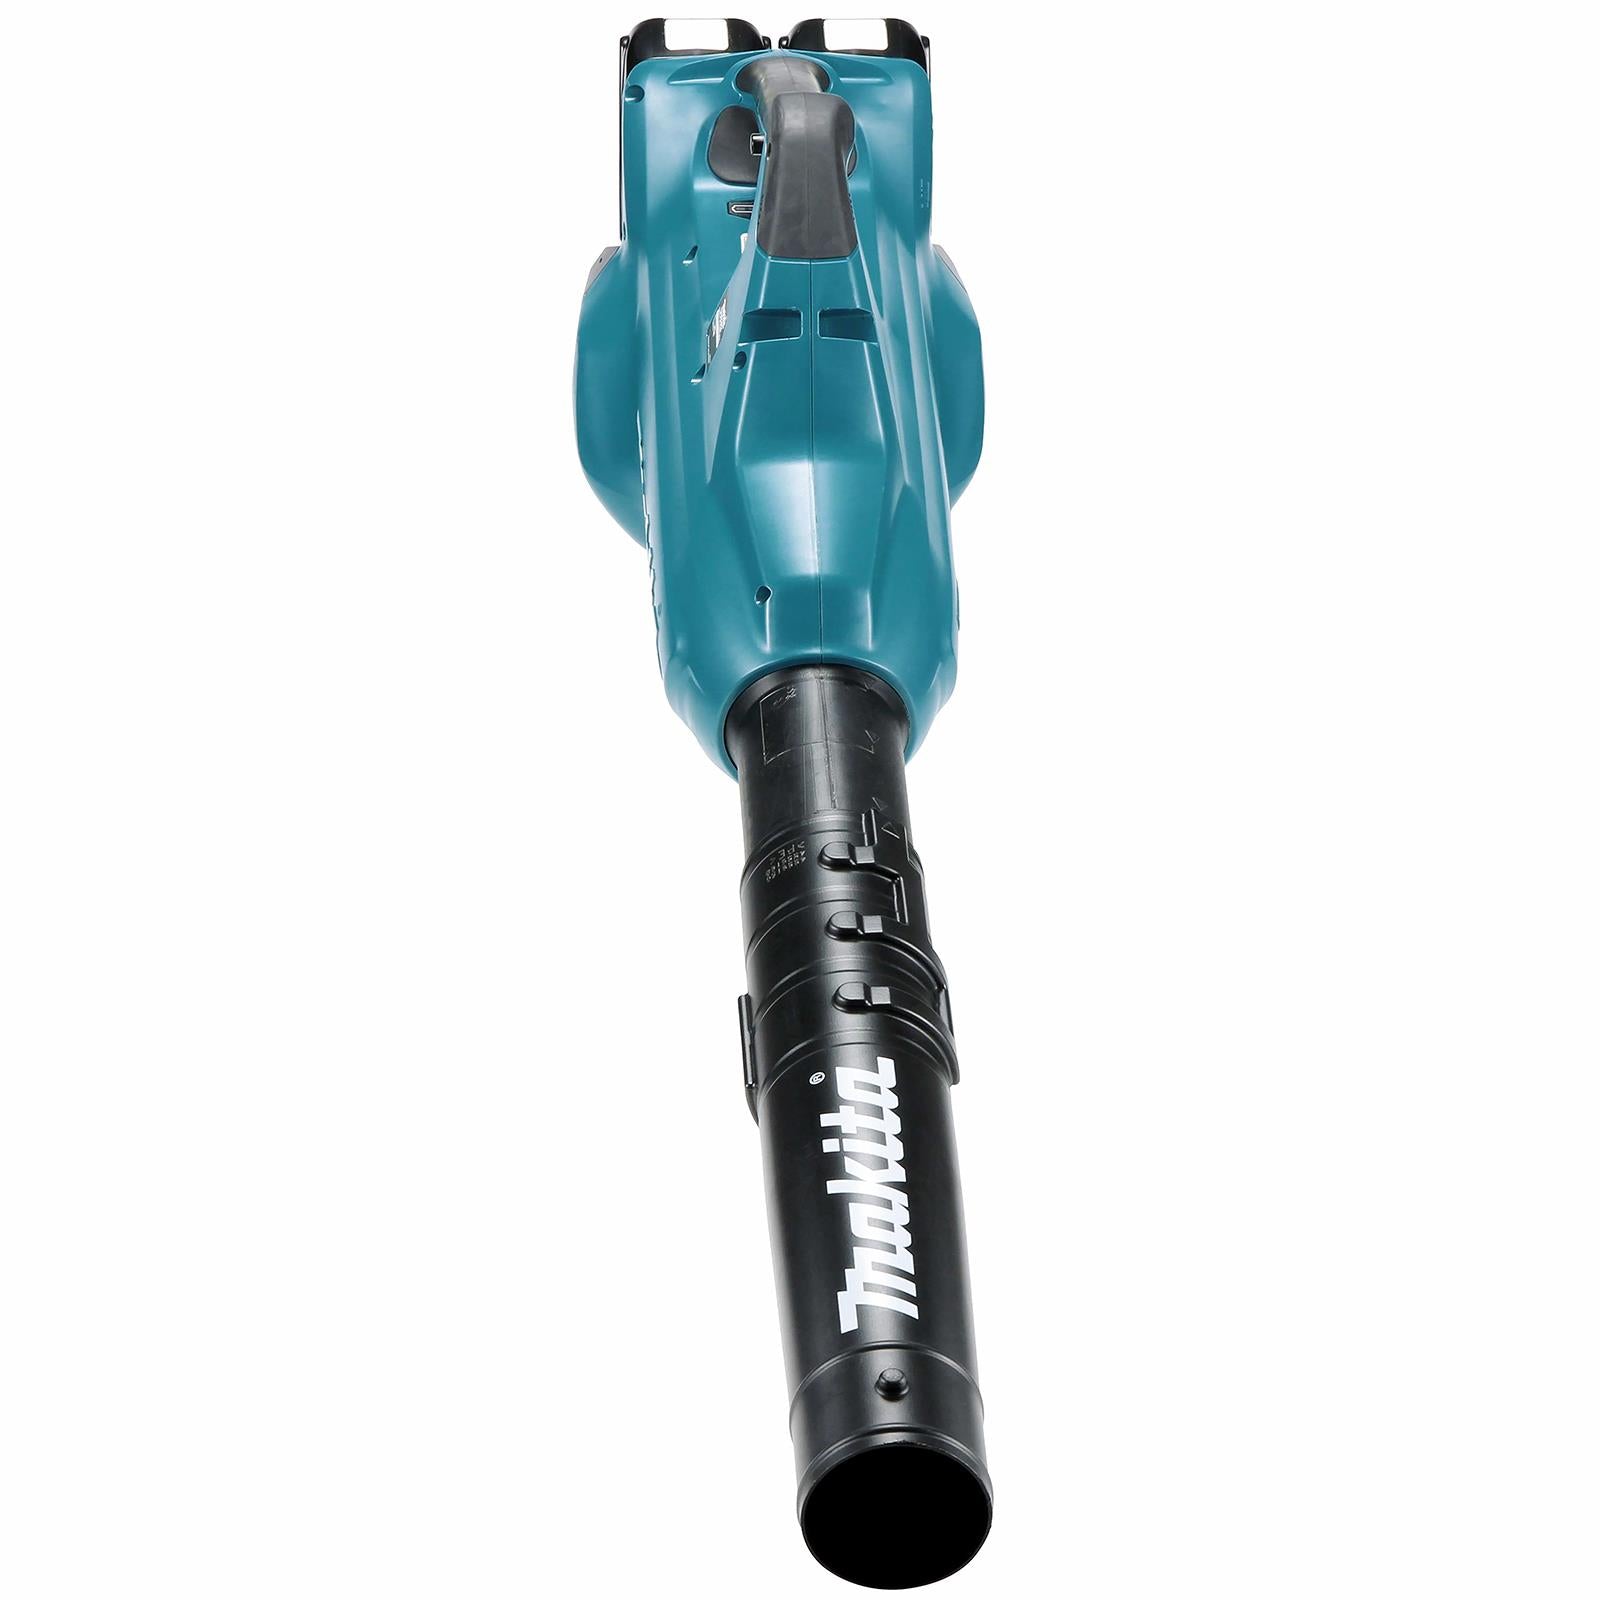 Makita Leaf Blower Kit 18V x 2 LXT Brushless Cordless 2 x 6Ah Battery and Dual Rapid Charger 14.4N Garden Grass Clippings Construction DUB362PG2